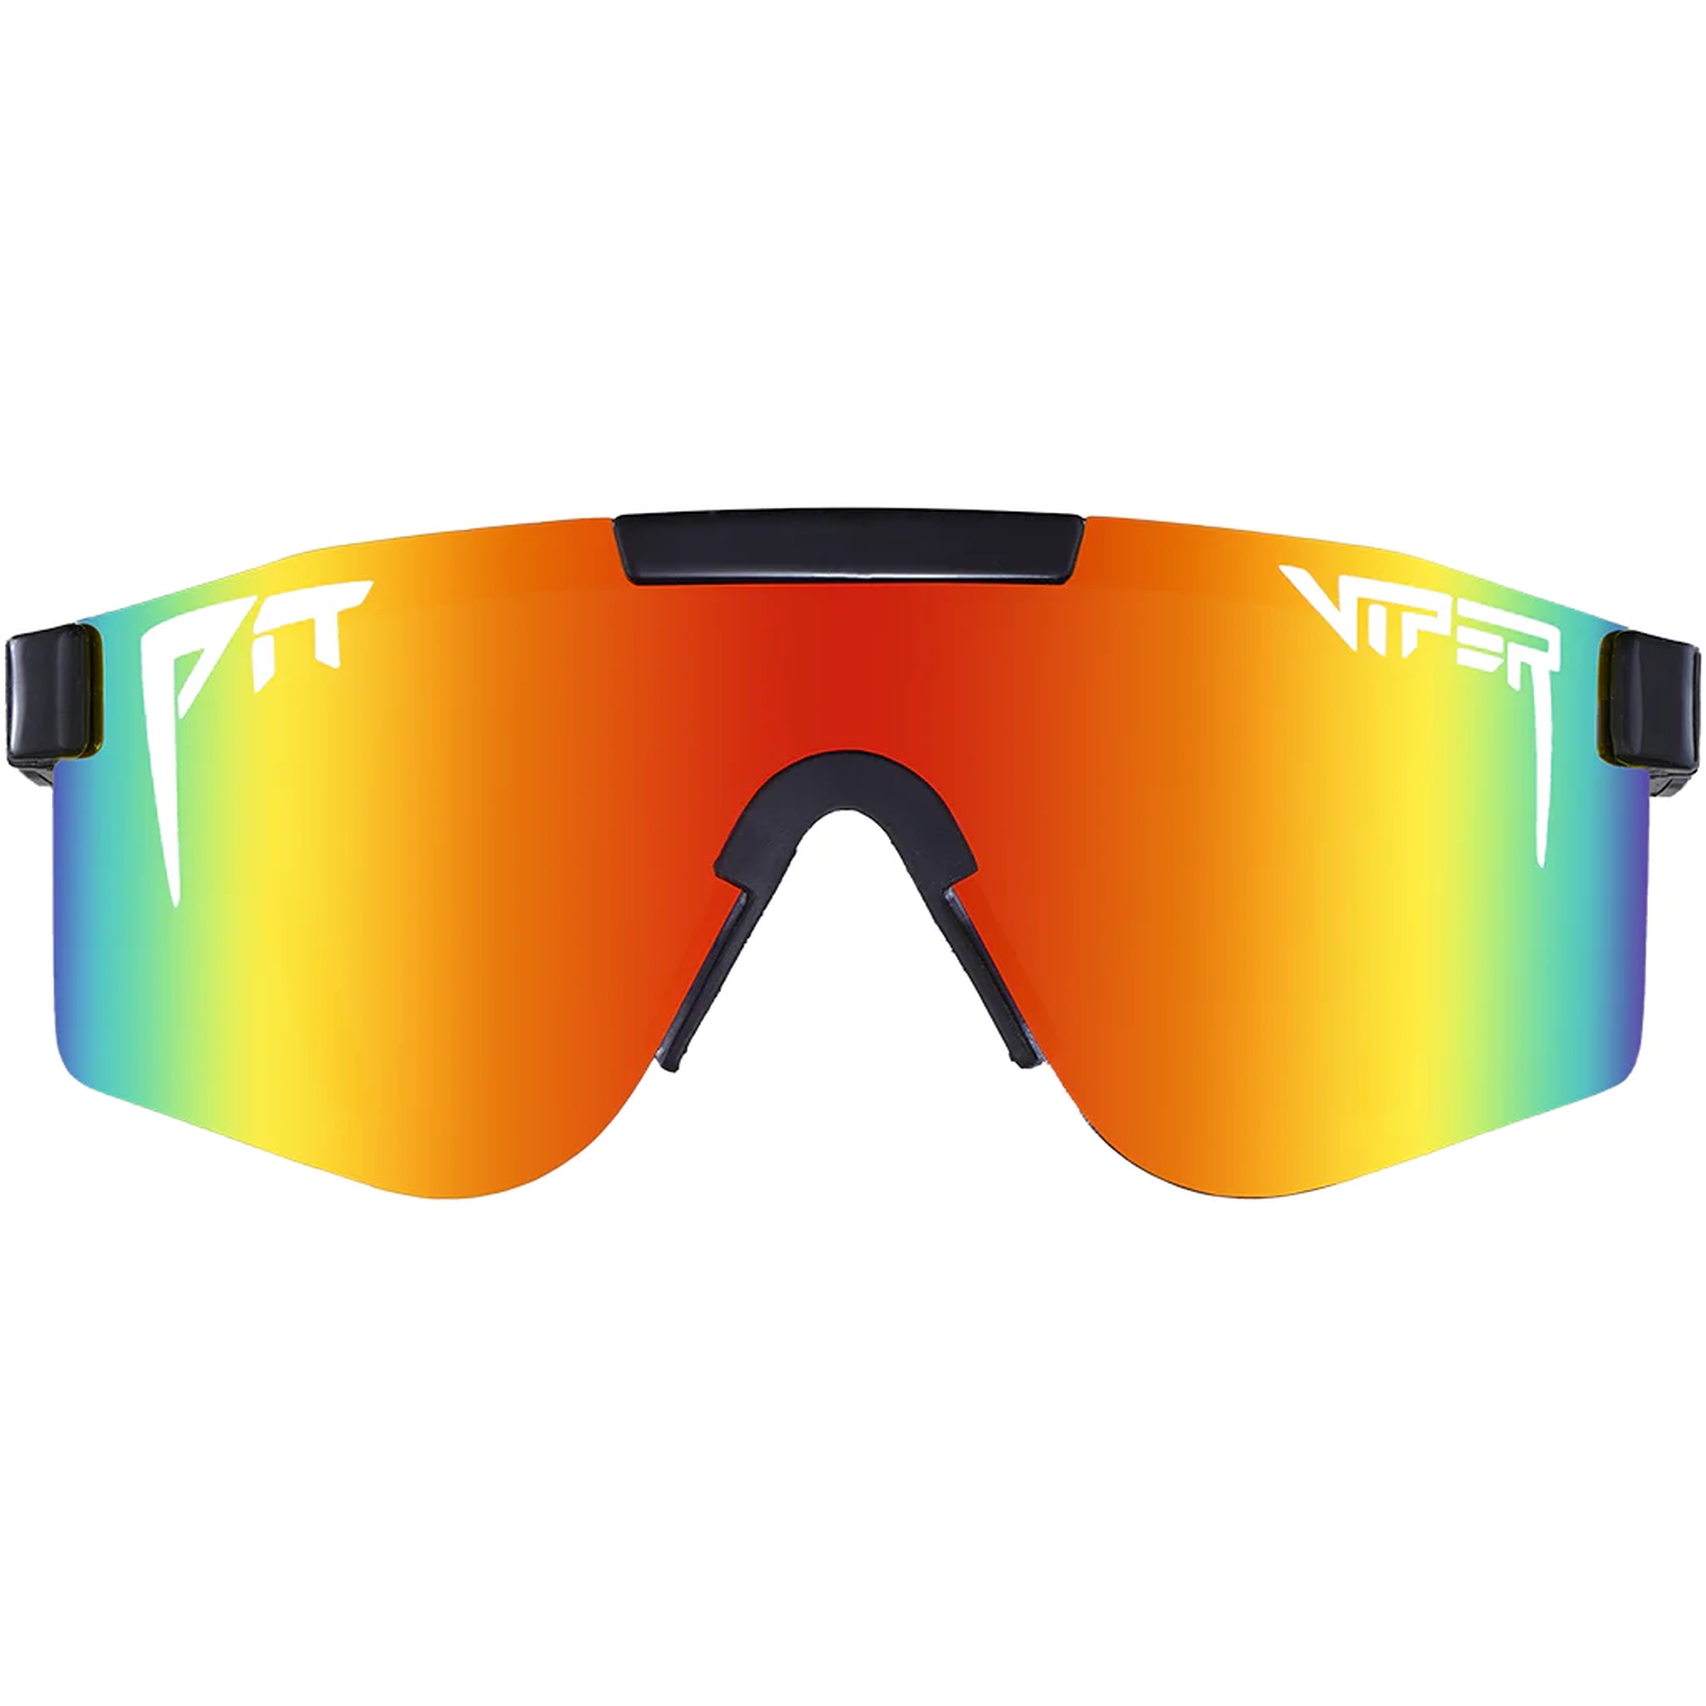 Productfoto van Pit Viper The Originals Glasses - Double Wide - The Mystery / Polarized Rainbow Mirror